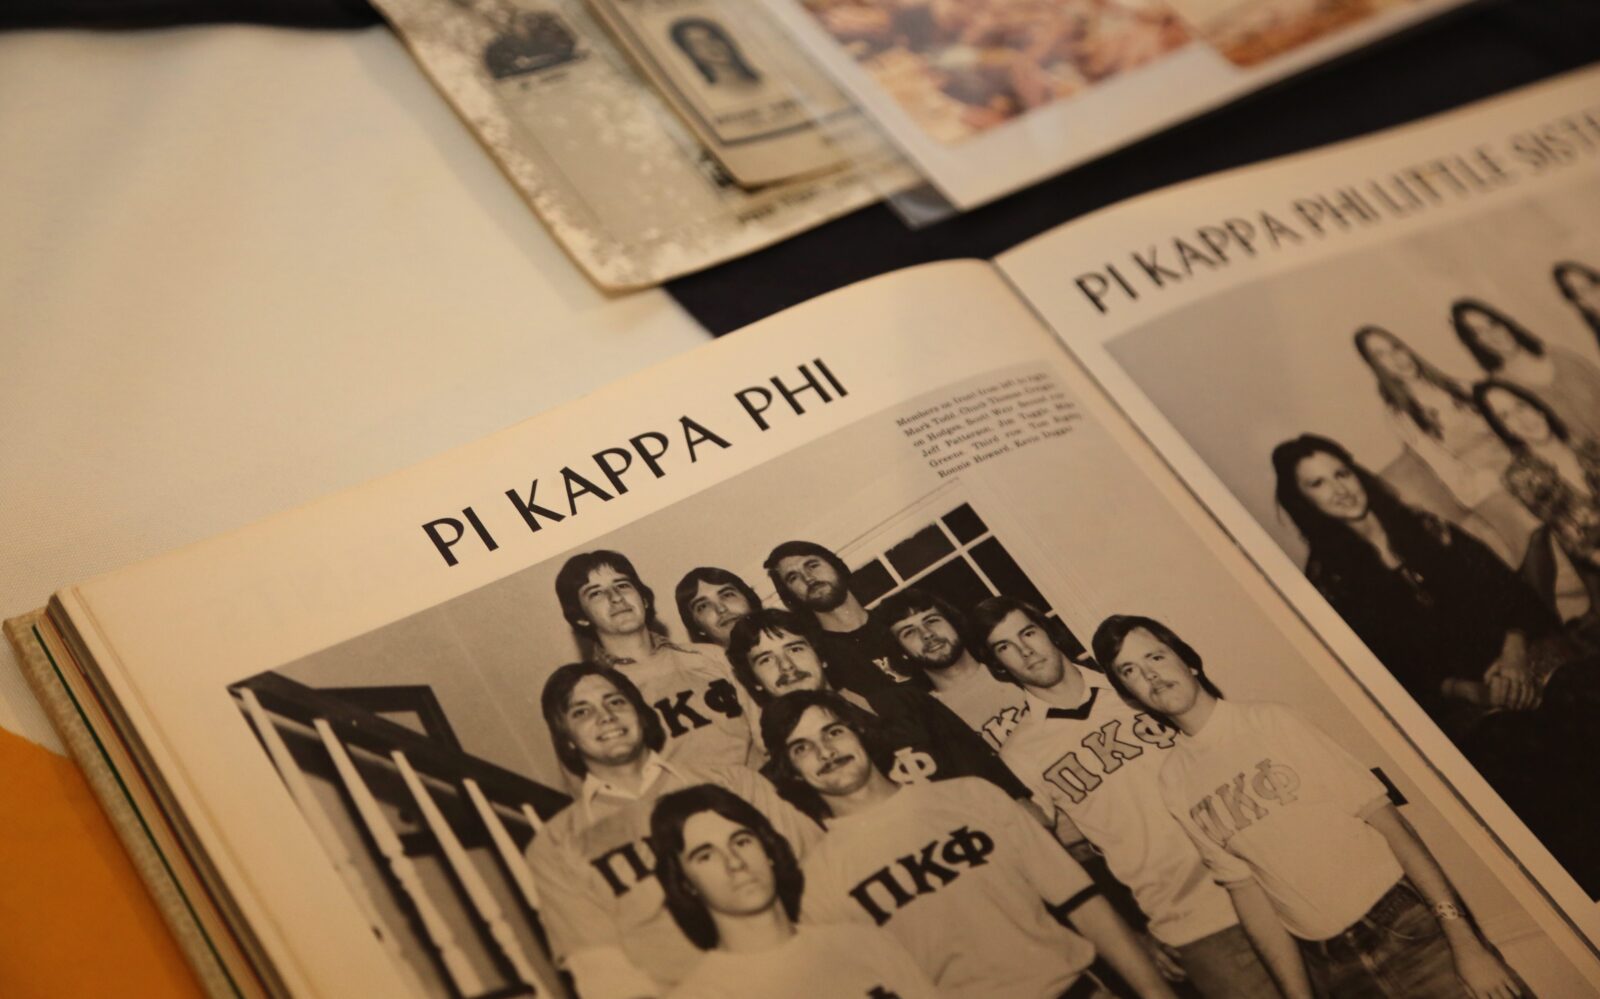 Vintage yearbooks with photos of Pi Kappa Phi members